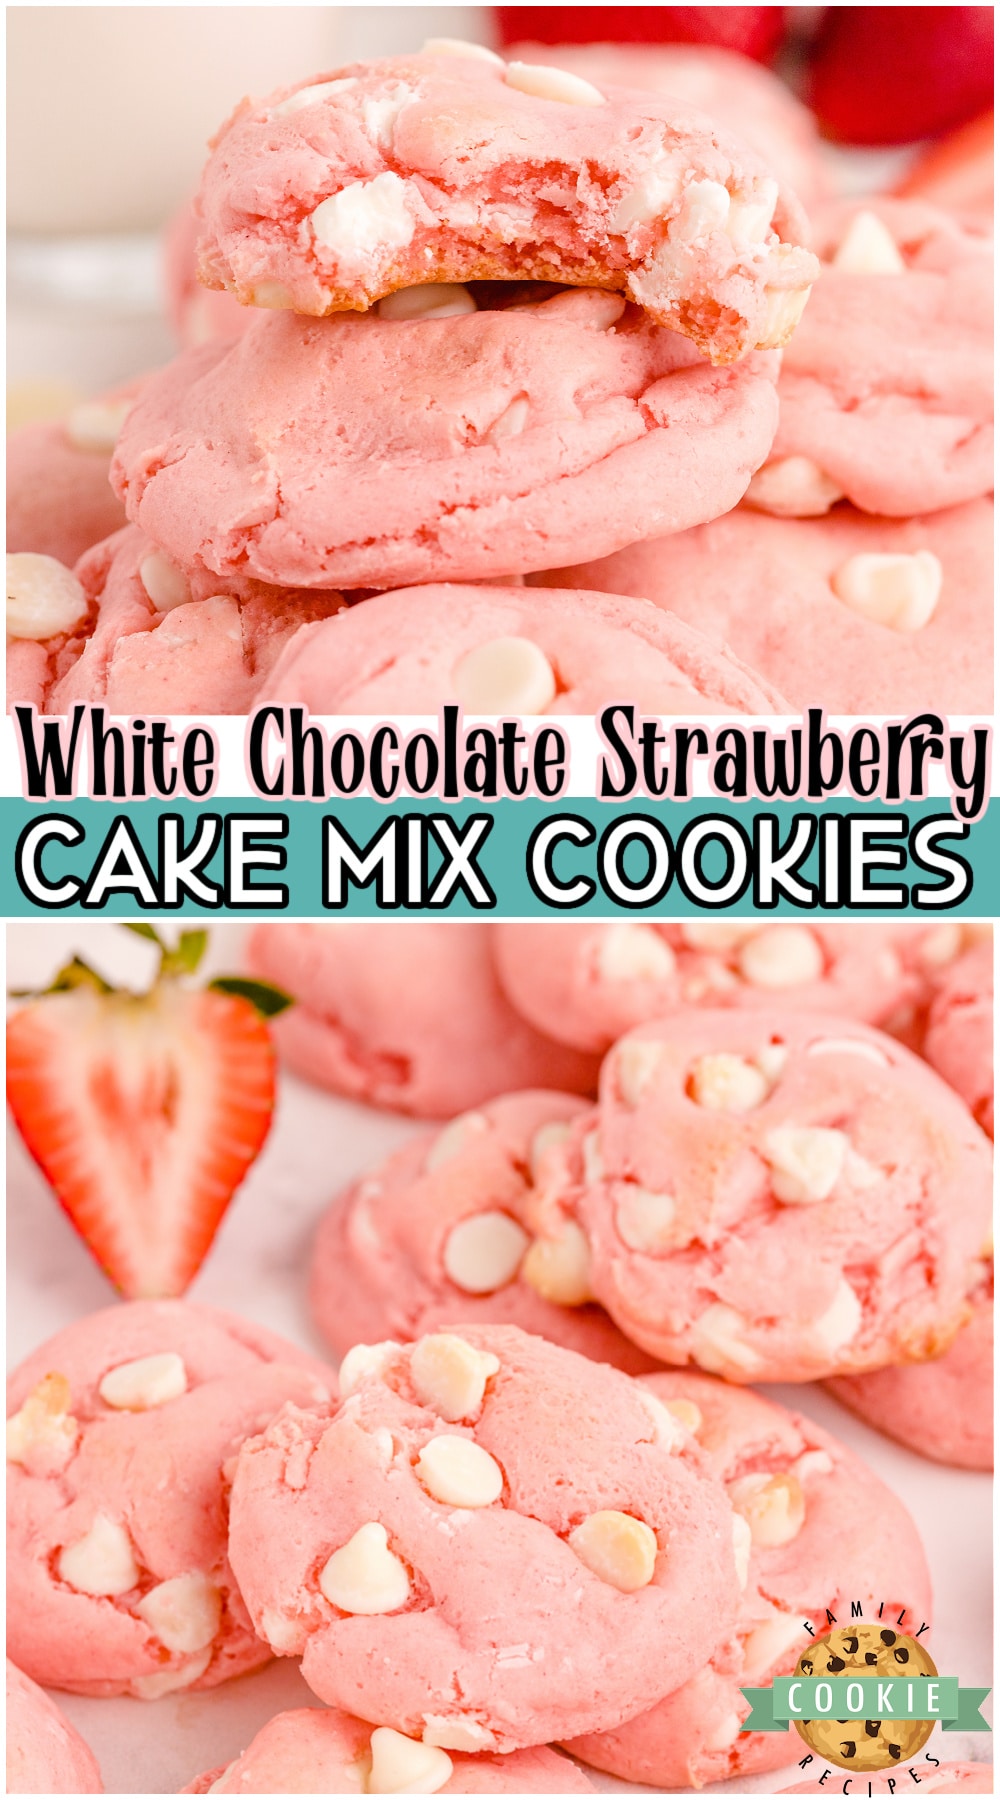 White Chocolate Strawberry Cake Mix Cookies are soft & chewy cookies that need just 4 ingredients! Lovely pink Strawberry Cake Mix cookie recipe that needs a cake mix, 2 eggs, oil and white chocolate chips! via @buttergirls